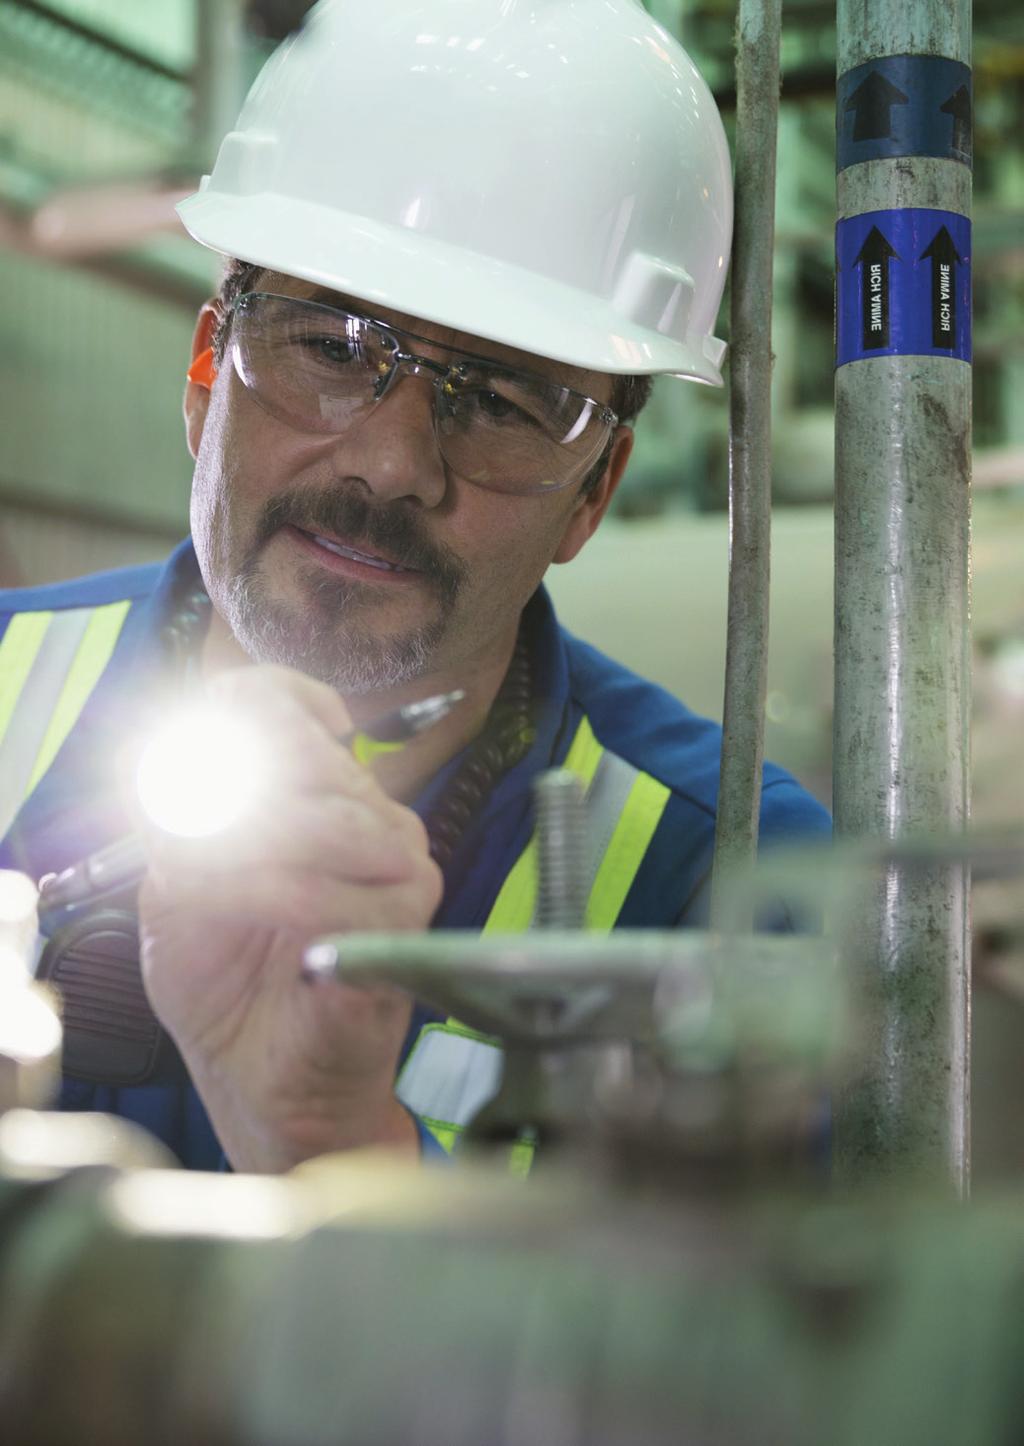 Make the Right Choice Honeywell offers industry-leading gas control, measurement, and analysis equipment to gas utilities and other users around the world.